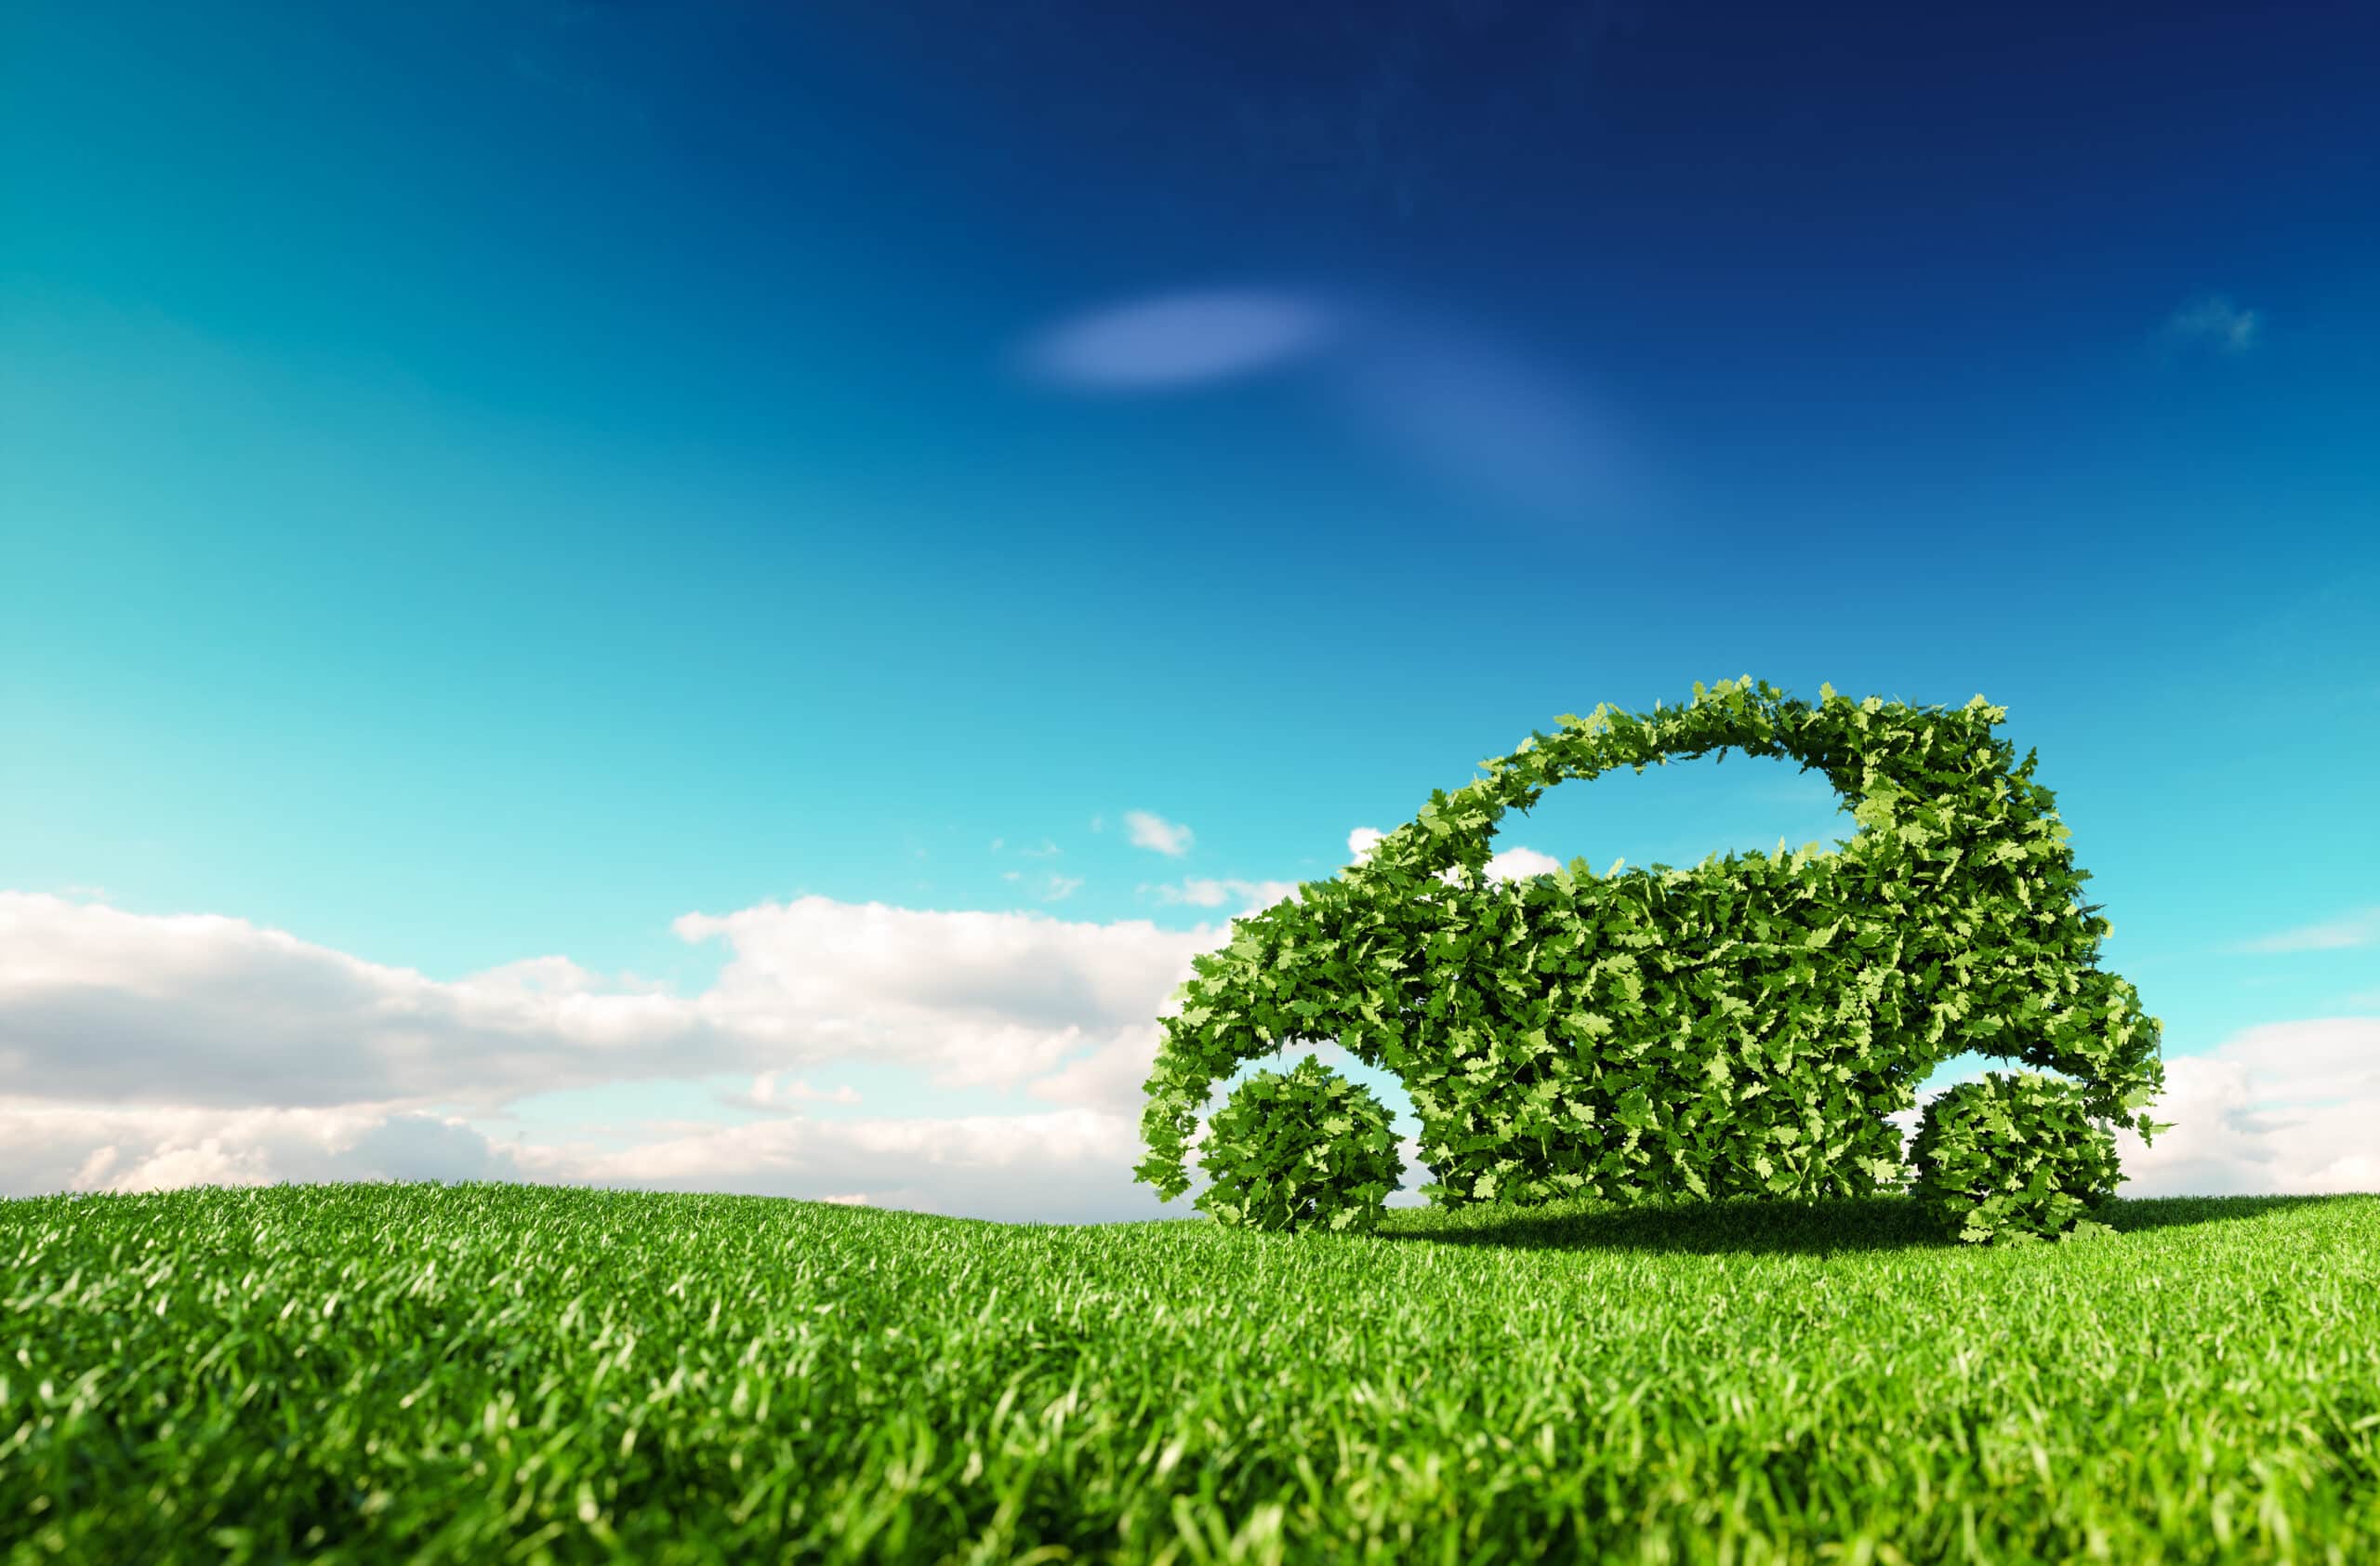 How to make your fleet more environmentally friendly